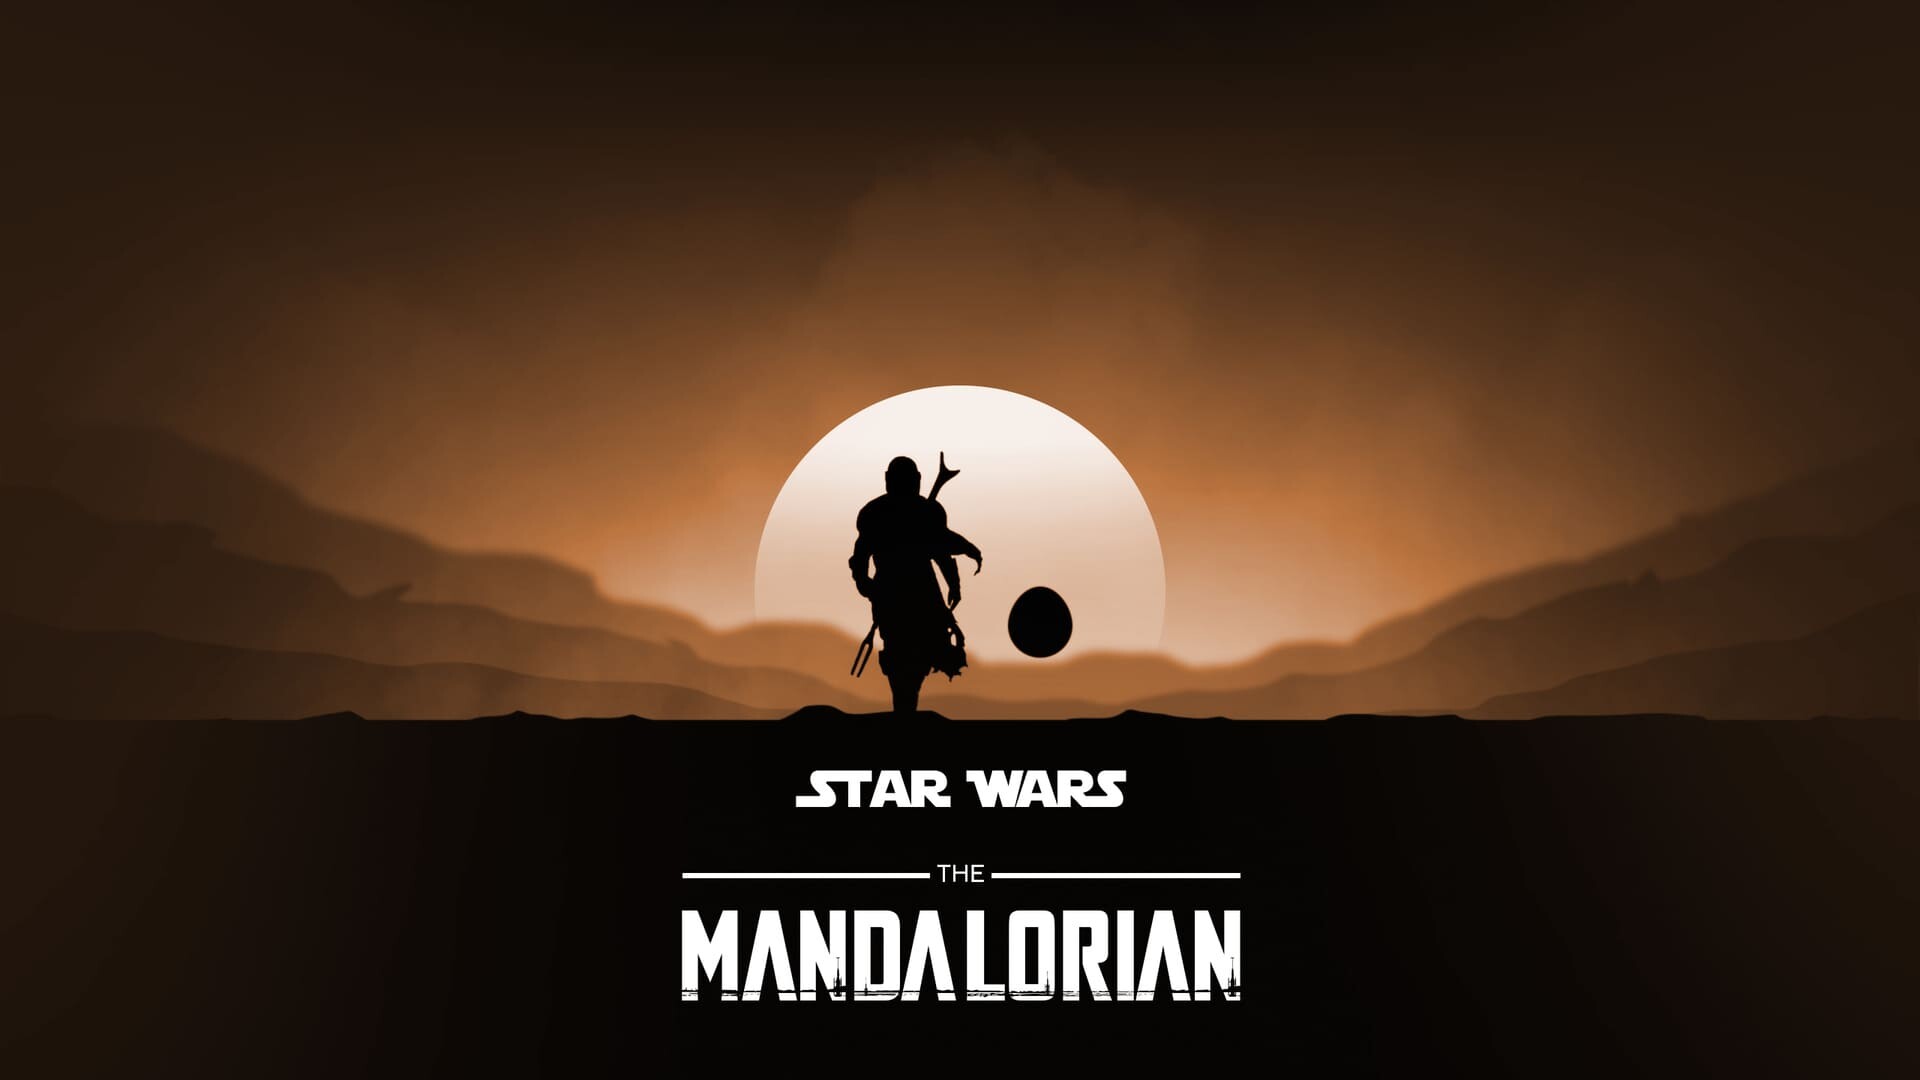 The Mandalorian: The Star Wars series led by Pedro Pascal as a lone gunfighter from Mandalore. 1920x1080 Full HD Wallpaper.